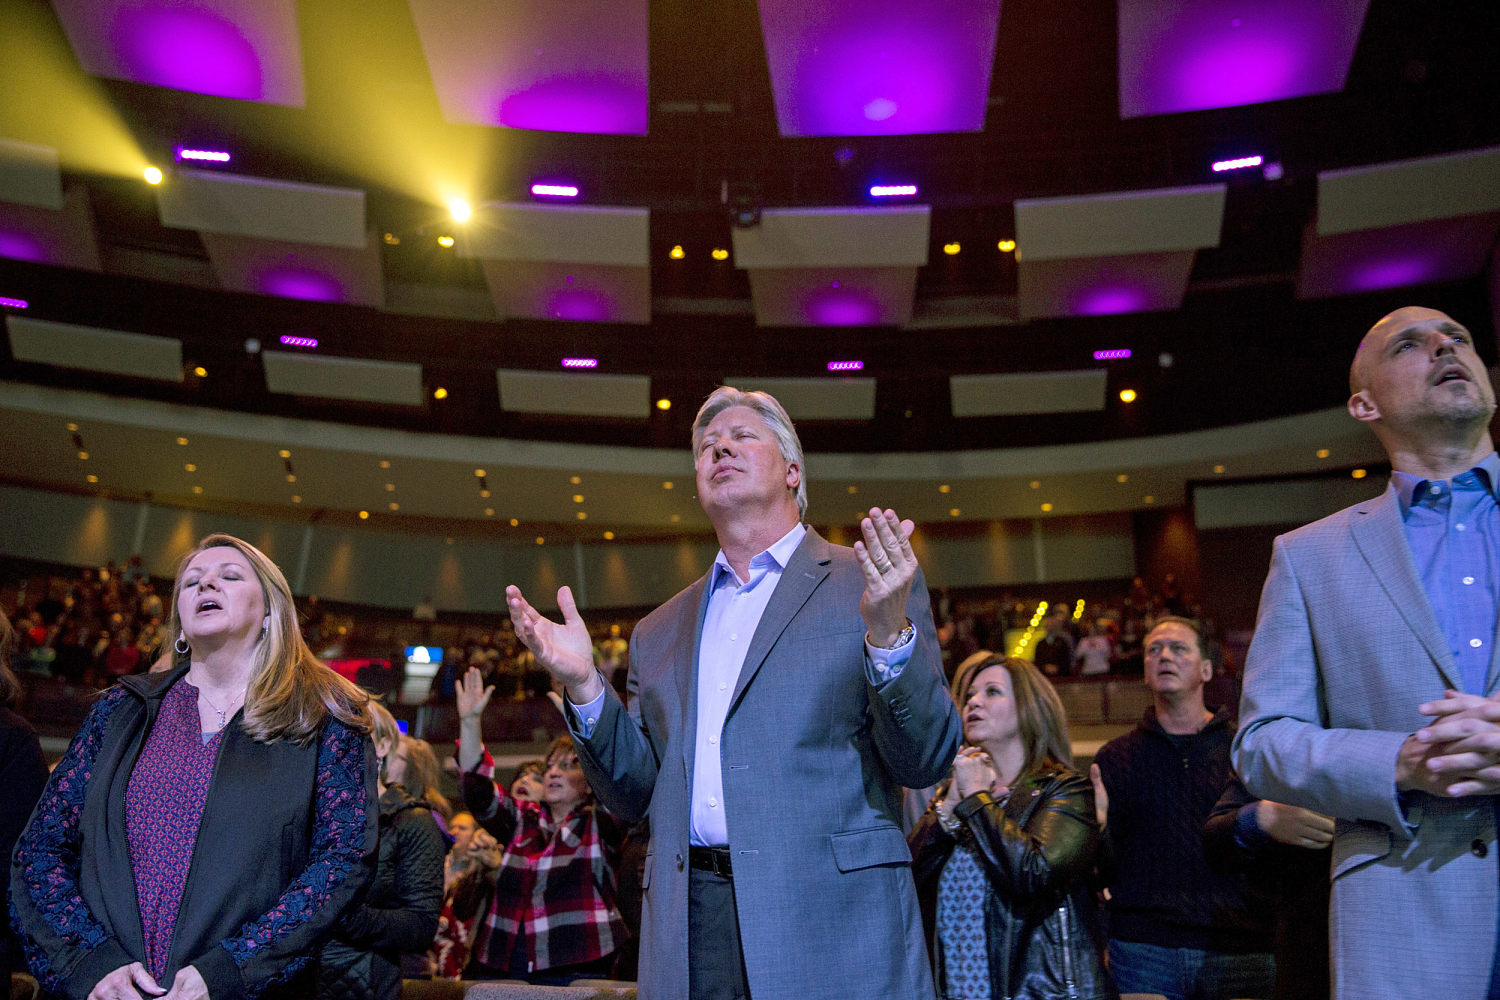 Pastor Robert Morris resigns from Gateway Church after child sex abuse allegation